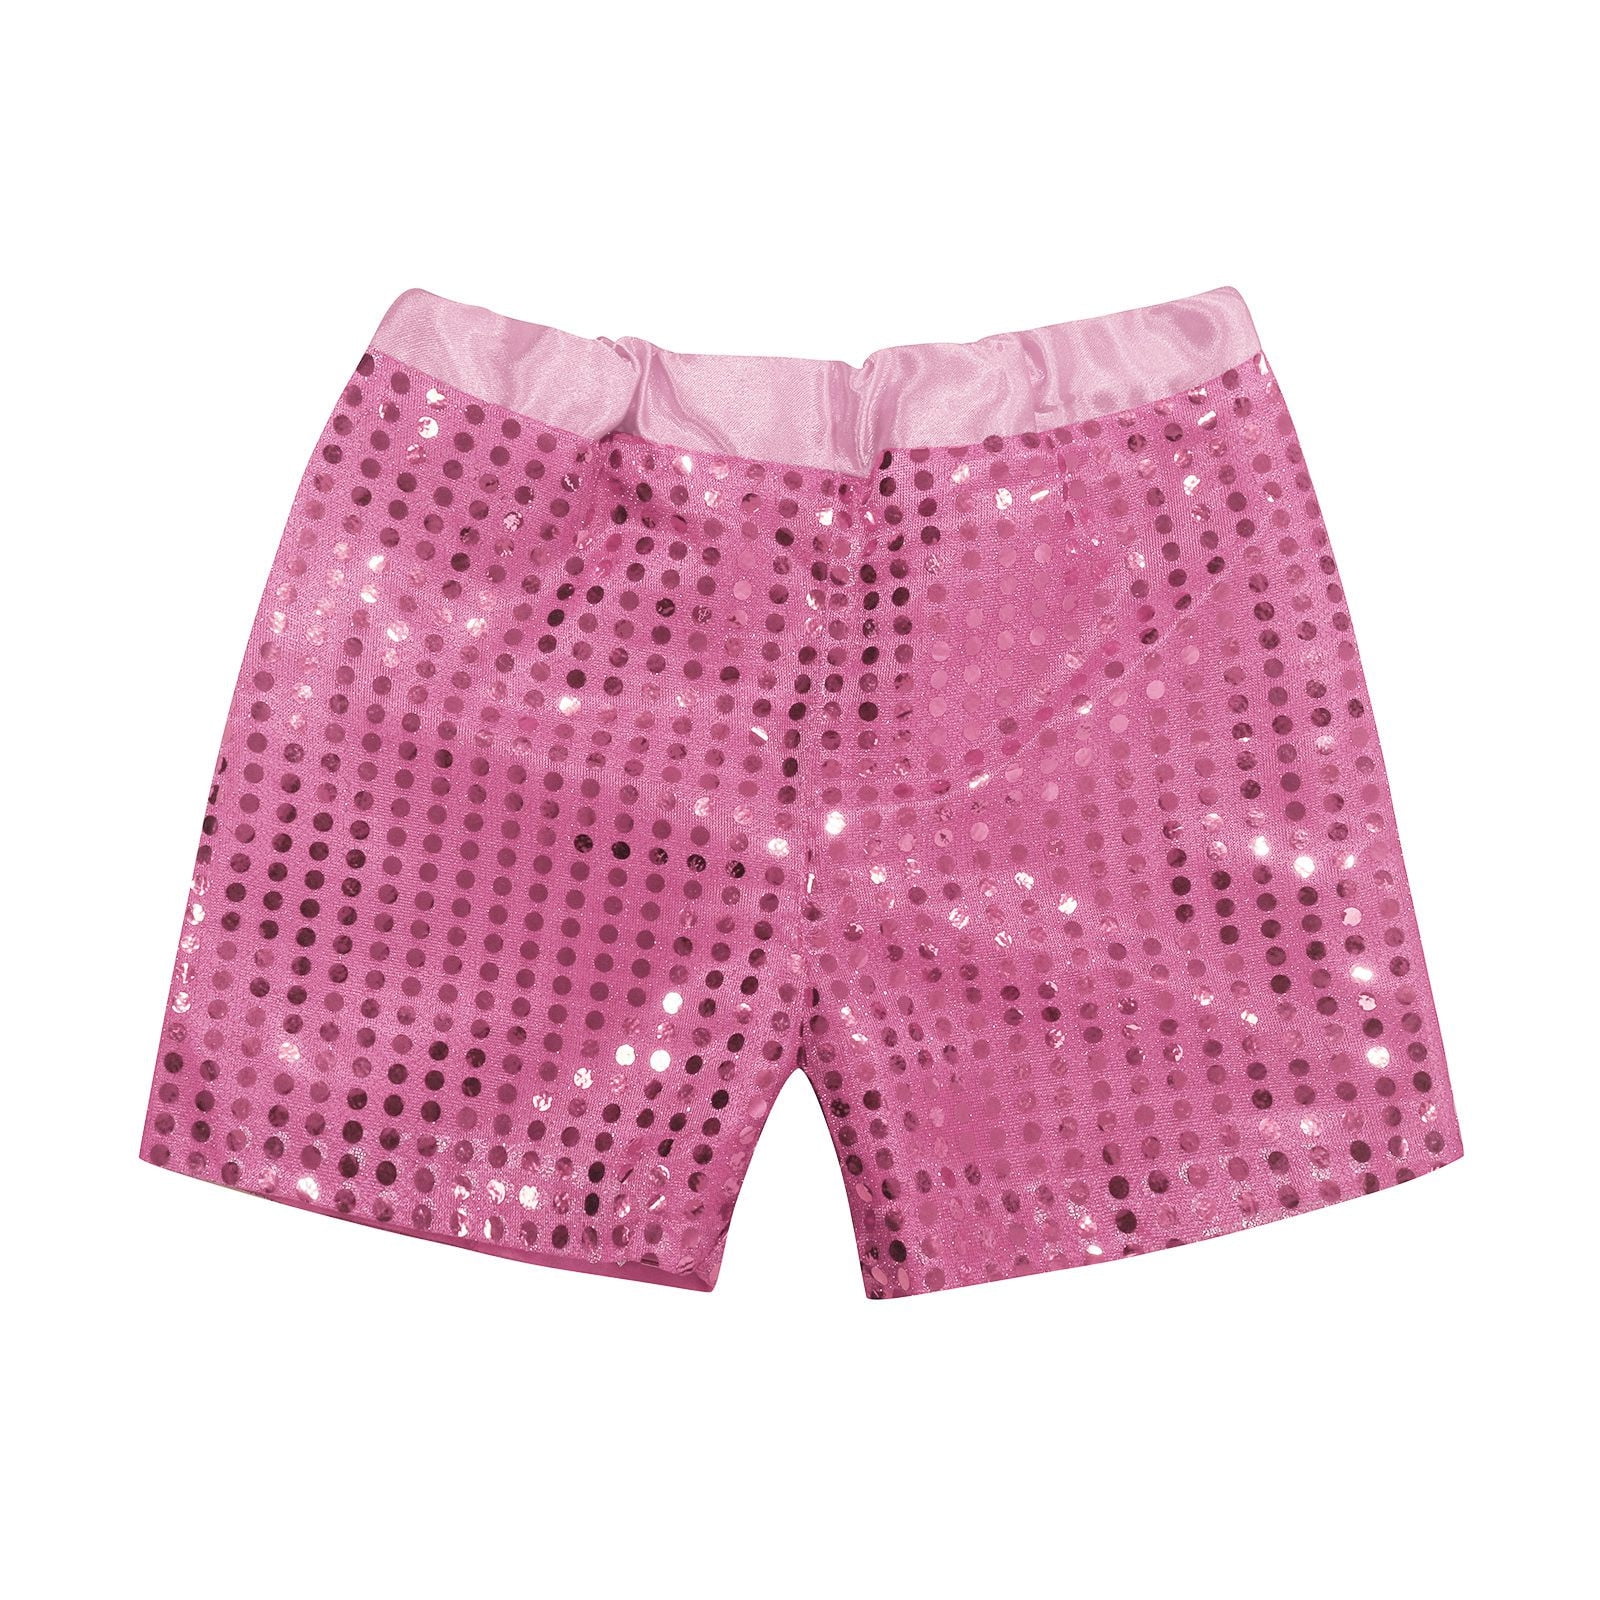 Ydojg Kids Casual Shorts Toddler Baby Girls Boys Sparkly Sequins ...